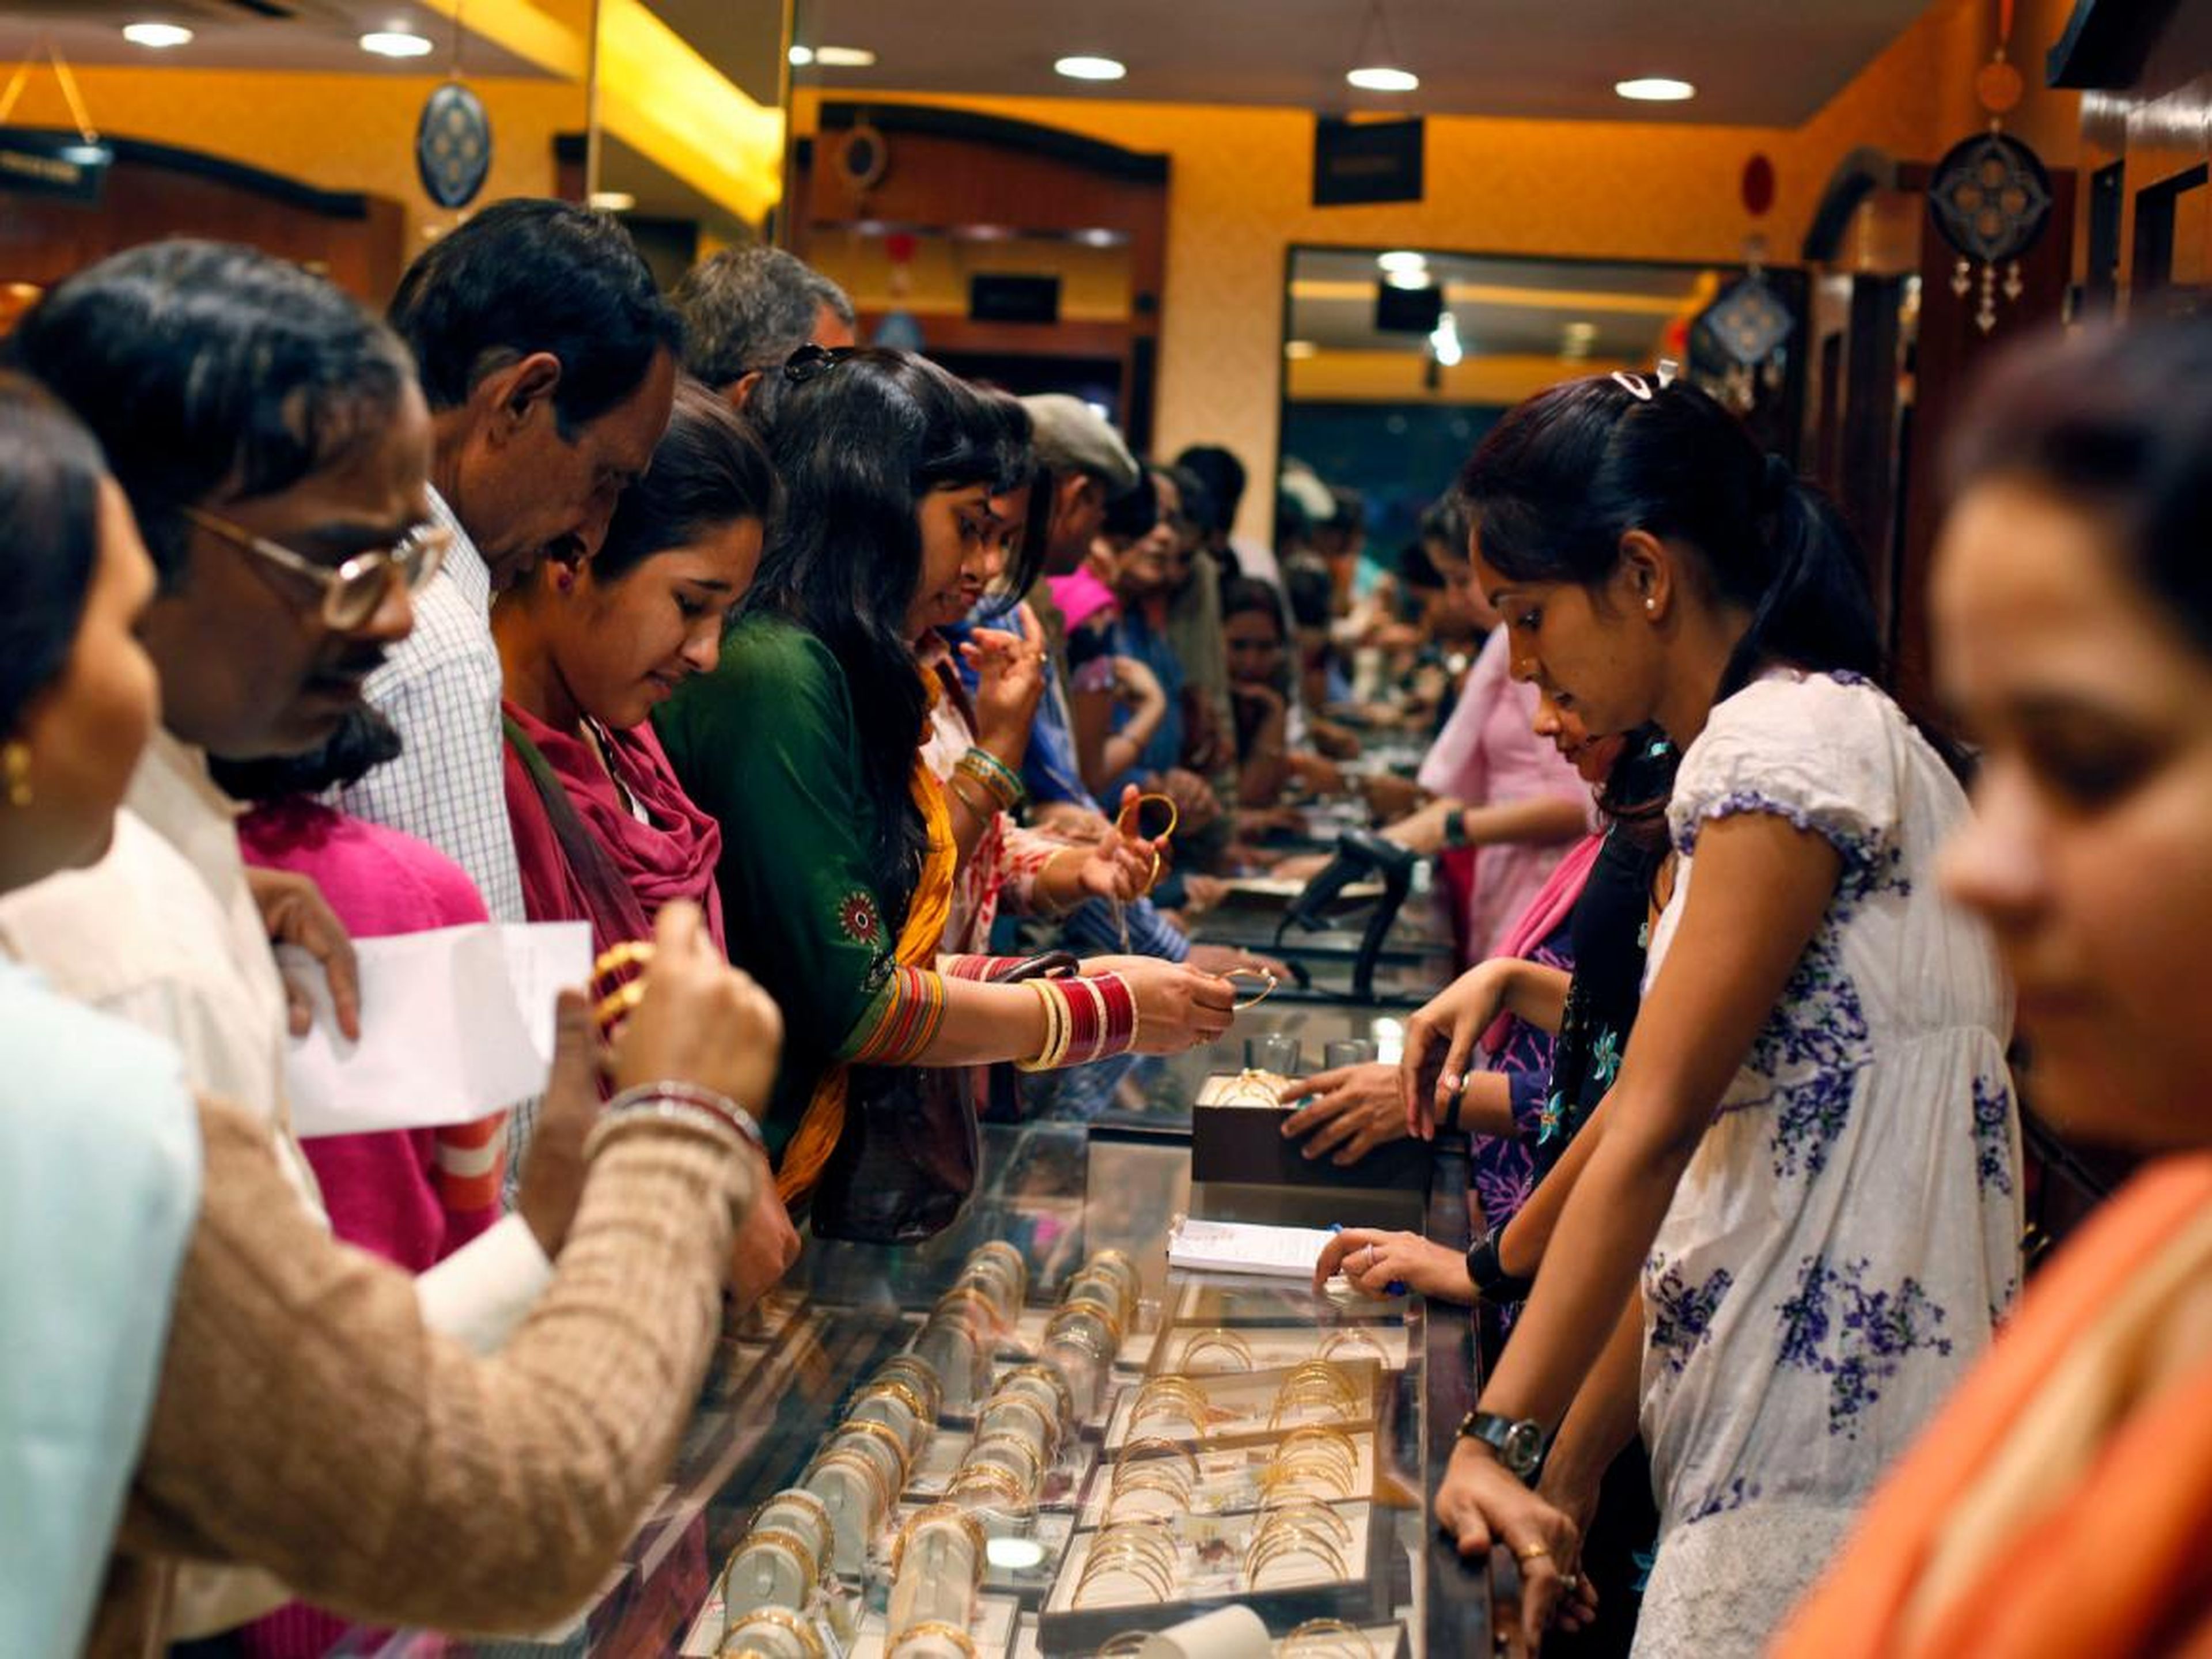 The first day of the five-day-long festival is known as Dhanteras and is when the most shopping takes place.